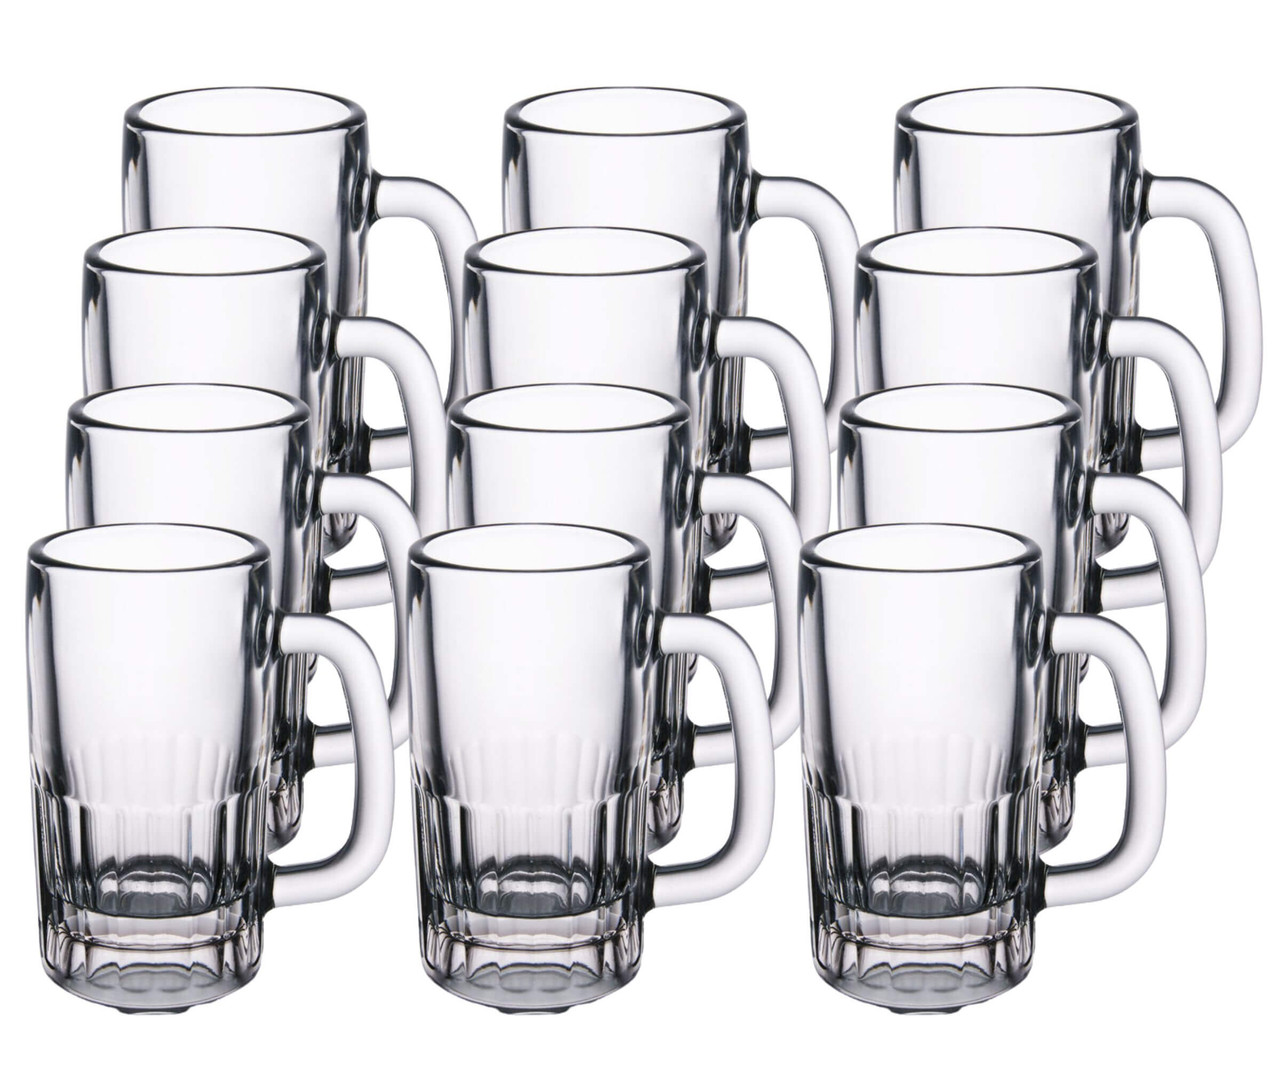 Libbey Case of 12 Sturdy and Durable 10 oz. Classic Design Beer Mugs-Chicken Pieces